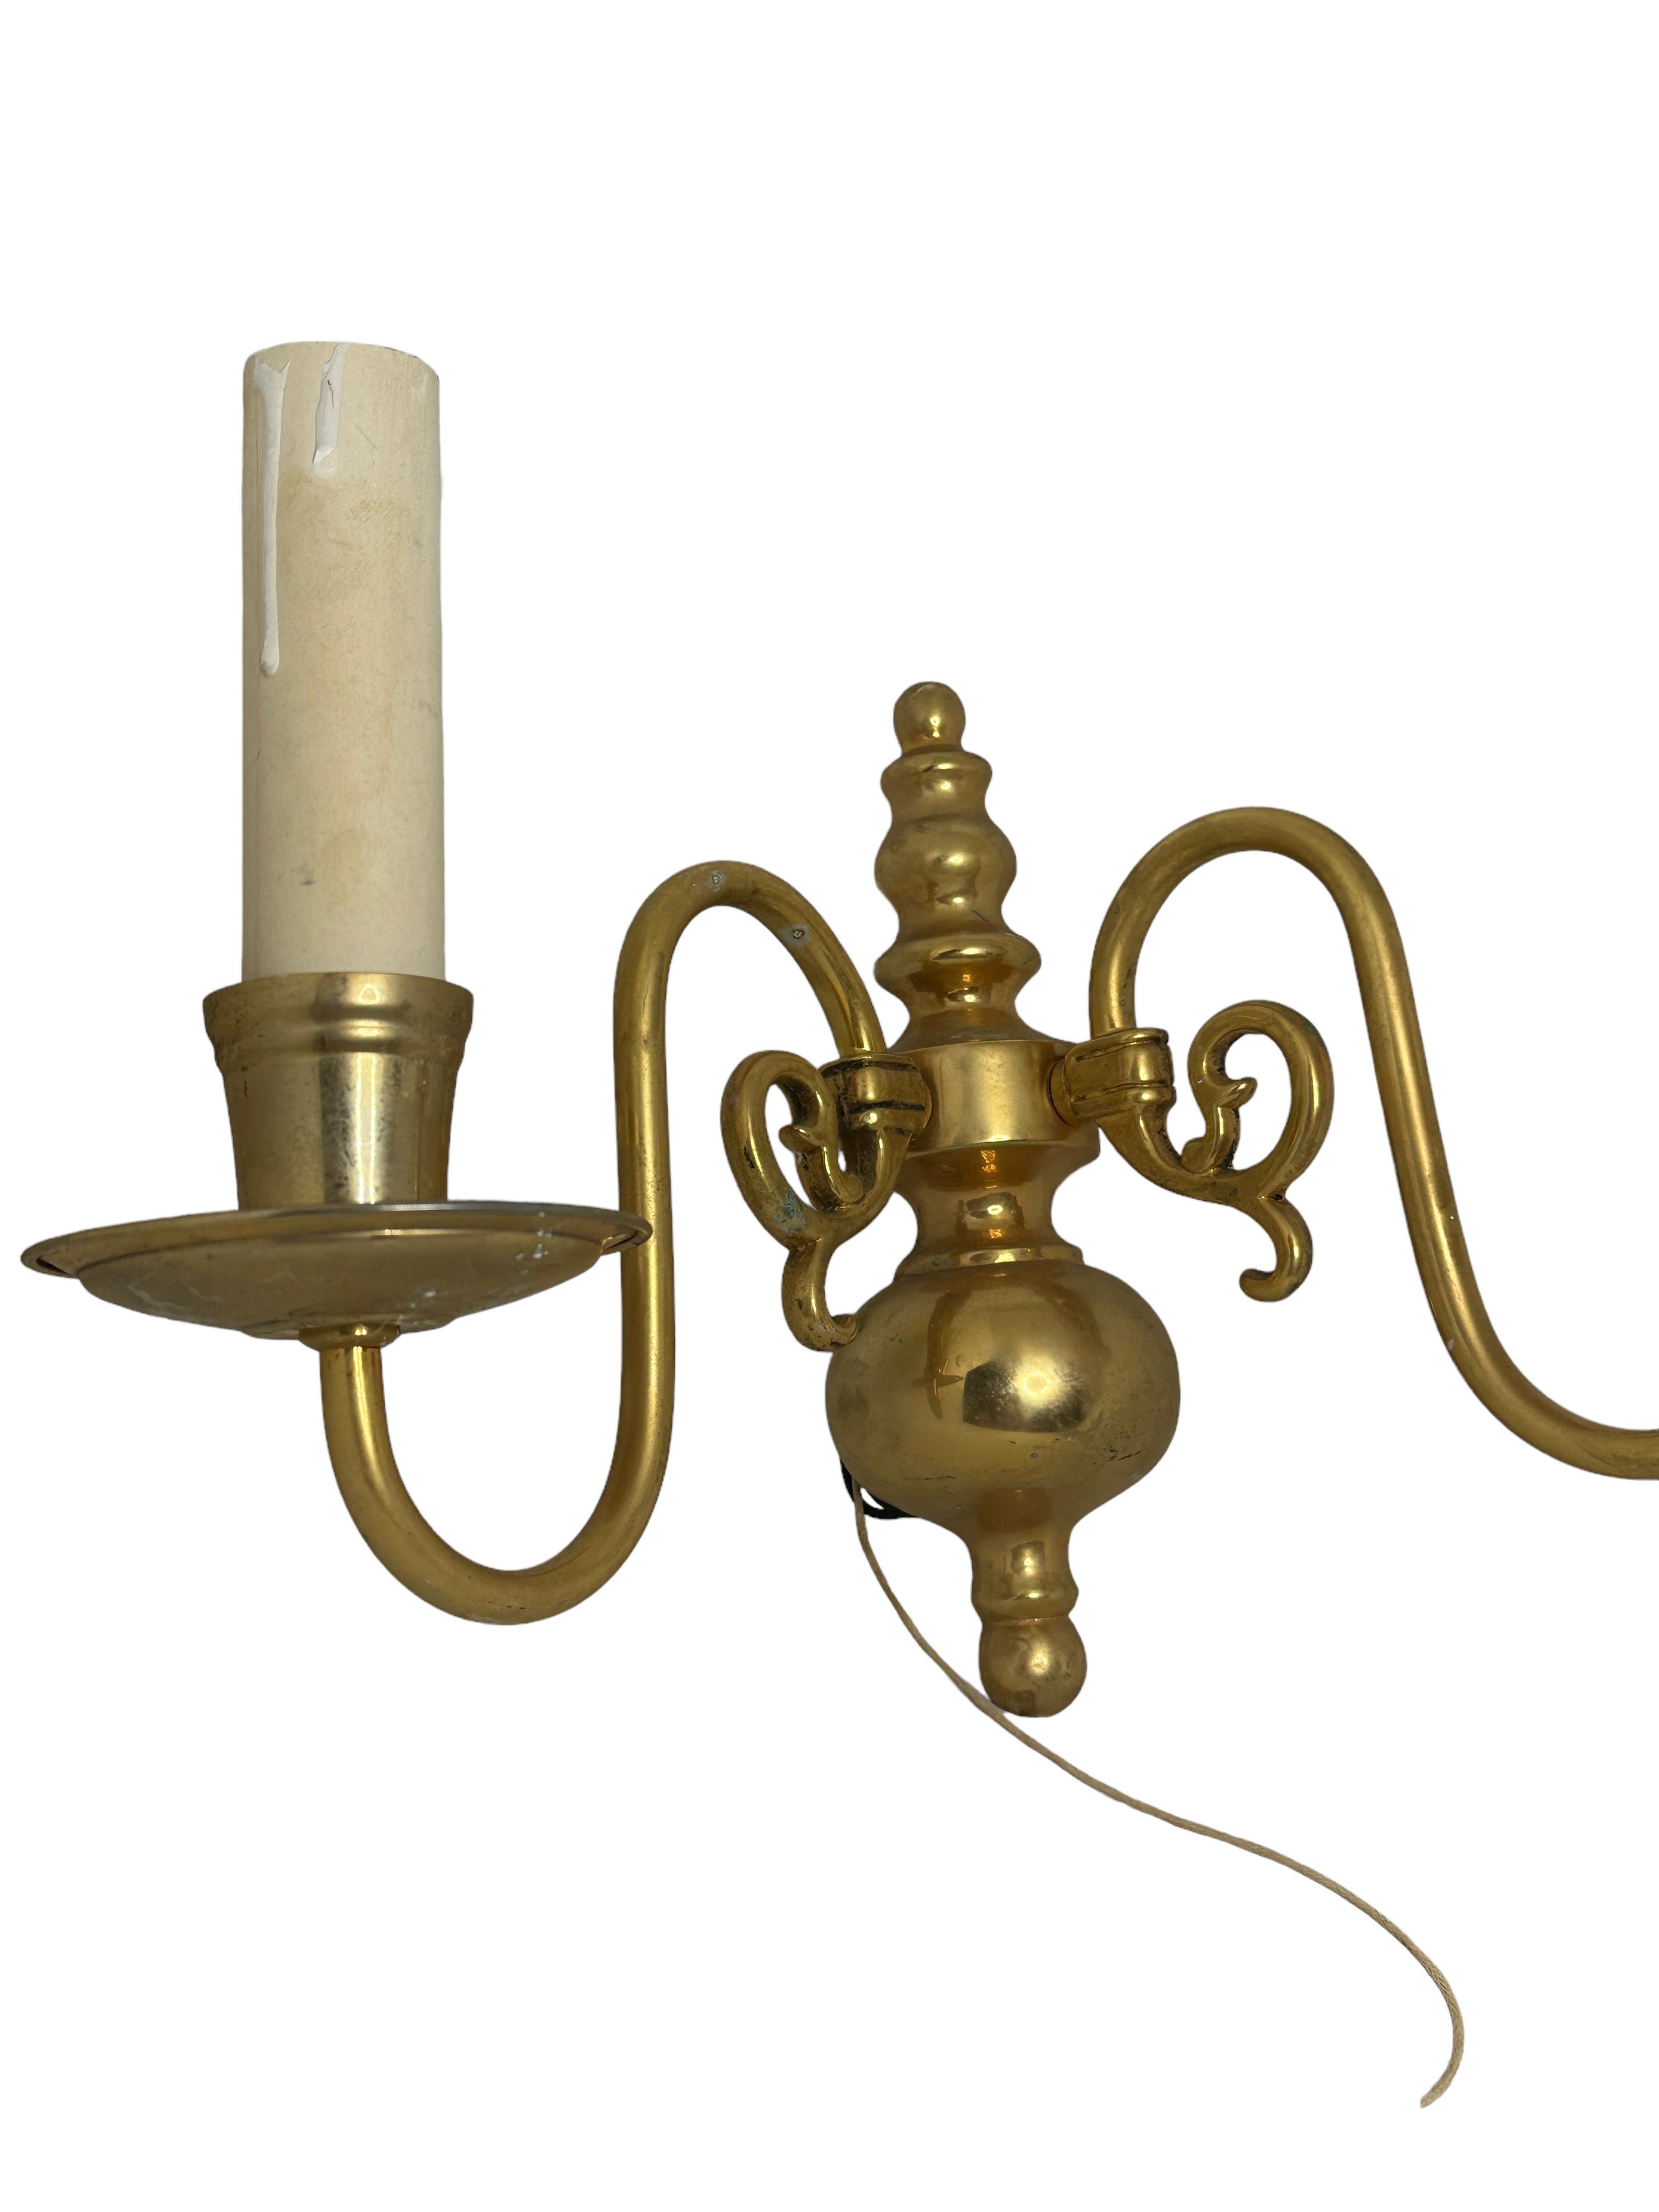 German Pair of Solid Brass Two-Light Wall Sconces, Vintage, Austria, 1950s For Sale